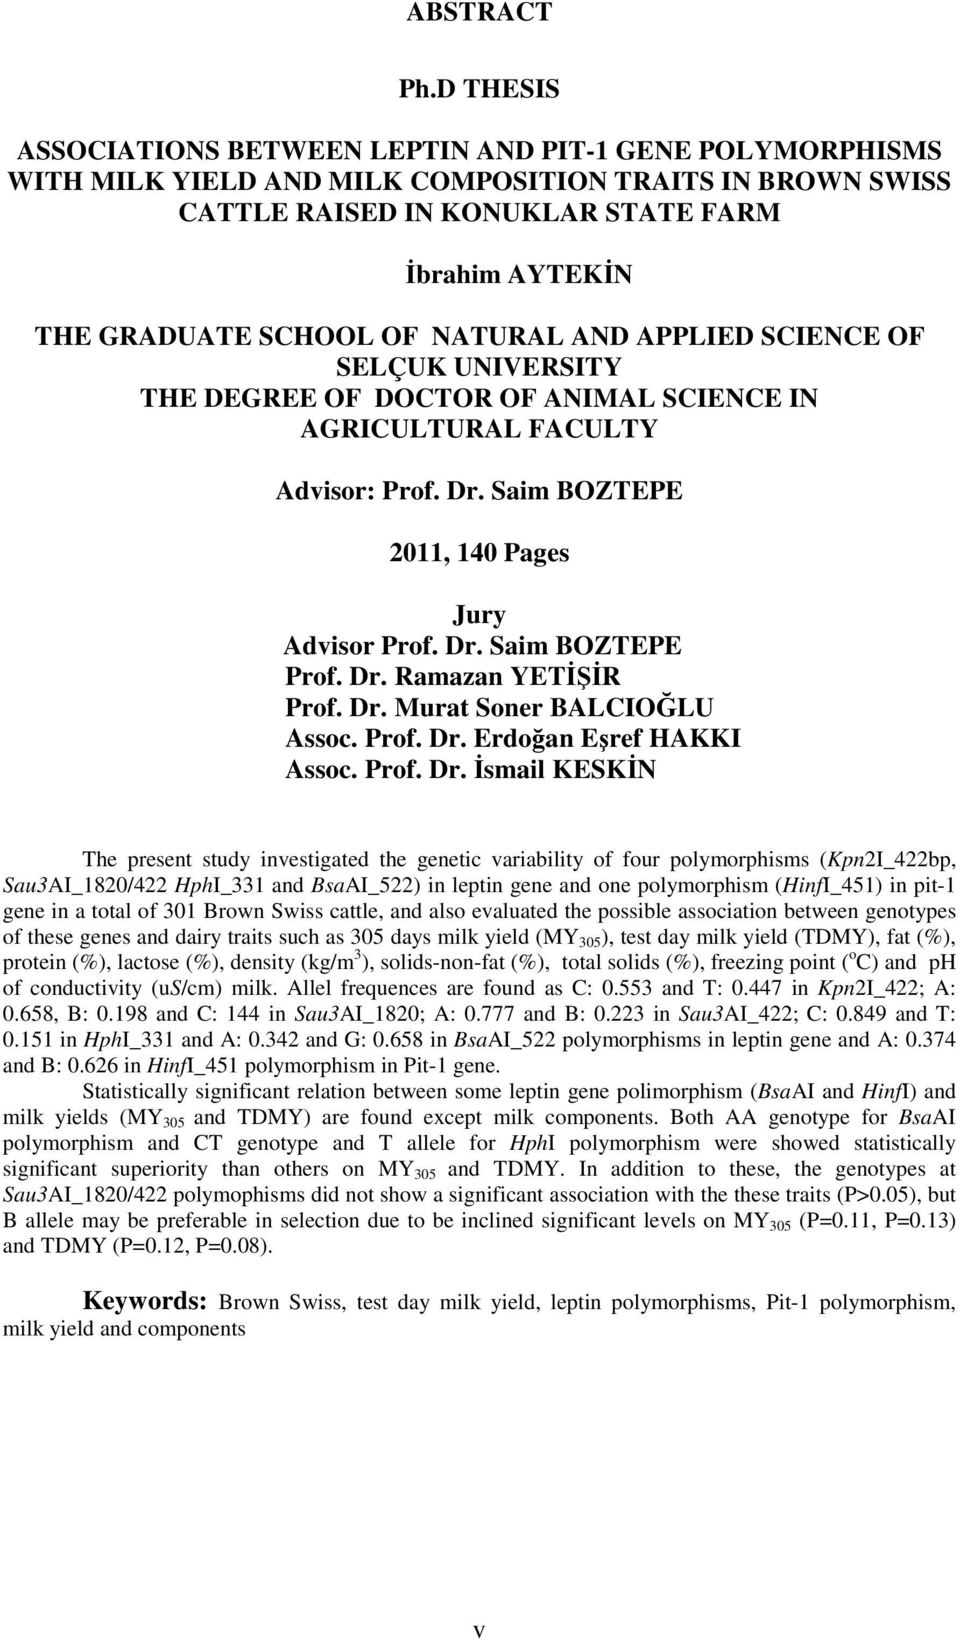 NATURAL AND APPLIED SCIENCE OF SELÇUK UNIVERSITY THE DEGREE OF DOCTOR OF ANIMAL SCIENCE IN AGRICULTURAL FACULTY Advisor: Prof. Dr. Saim BOZTEPE 2011, 140 Pages Jury Advisor Prof. Dr. Saim BOZTEPE Prof.